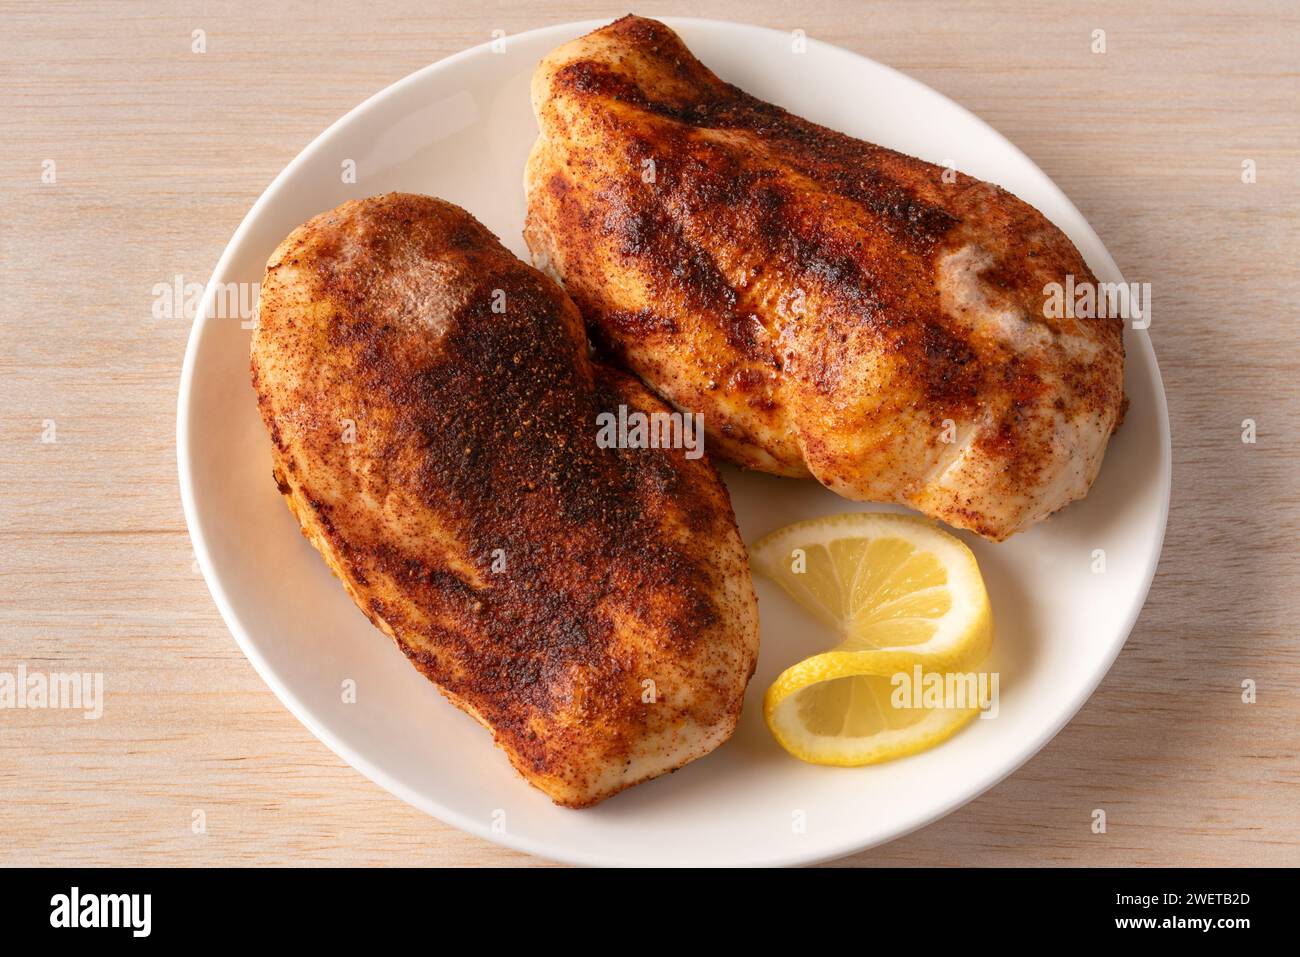 Roasted Chicken Breasts Stock Photo